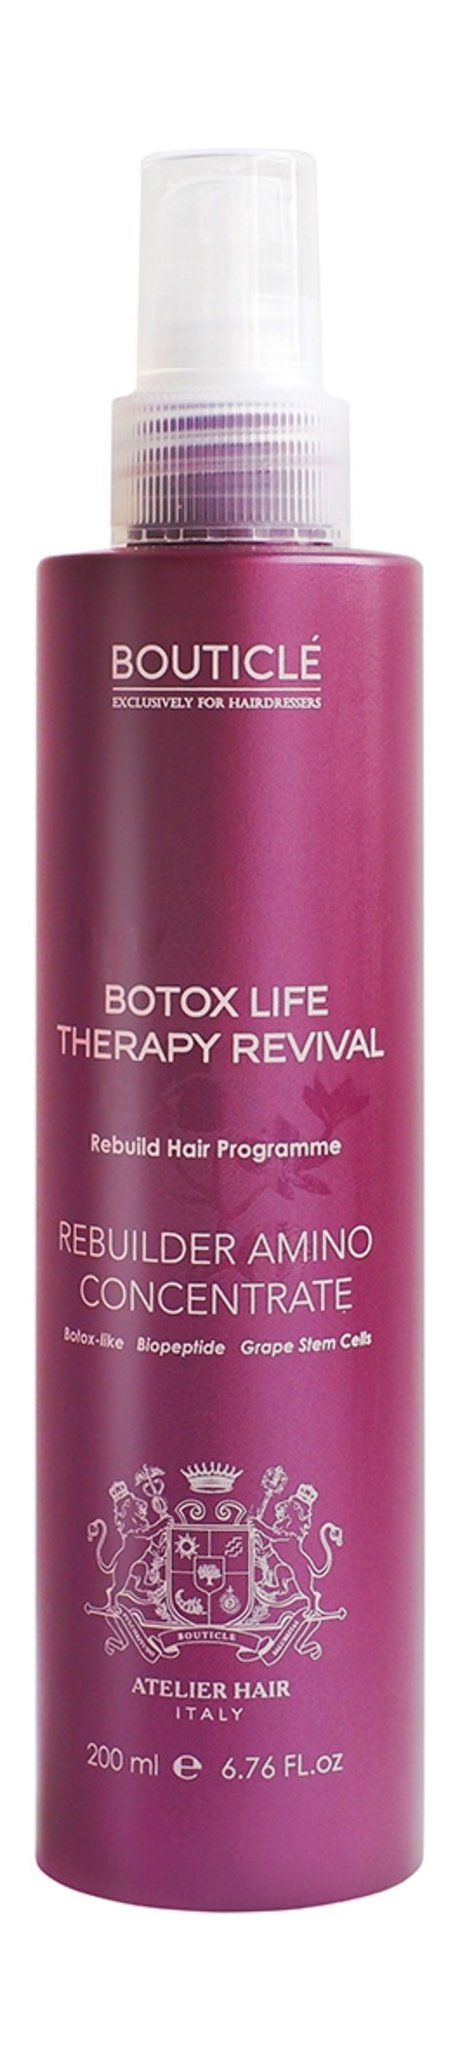 bouticle botox life therapy revival rebuilder amino concentrate